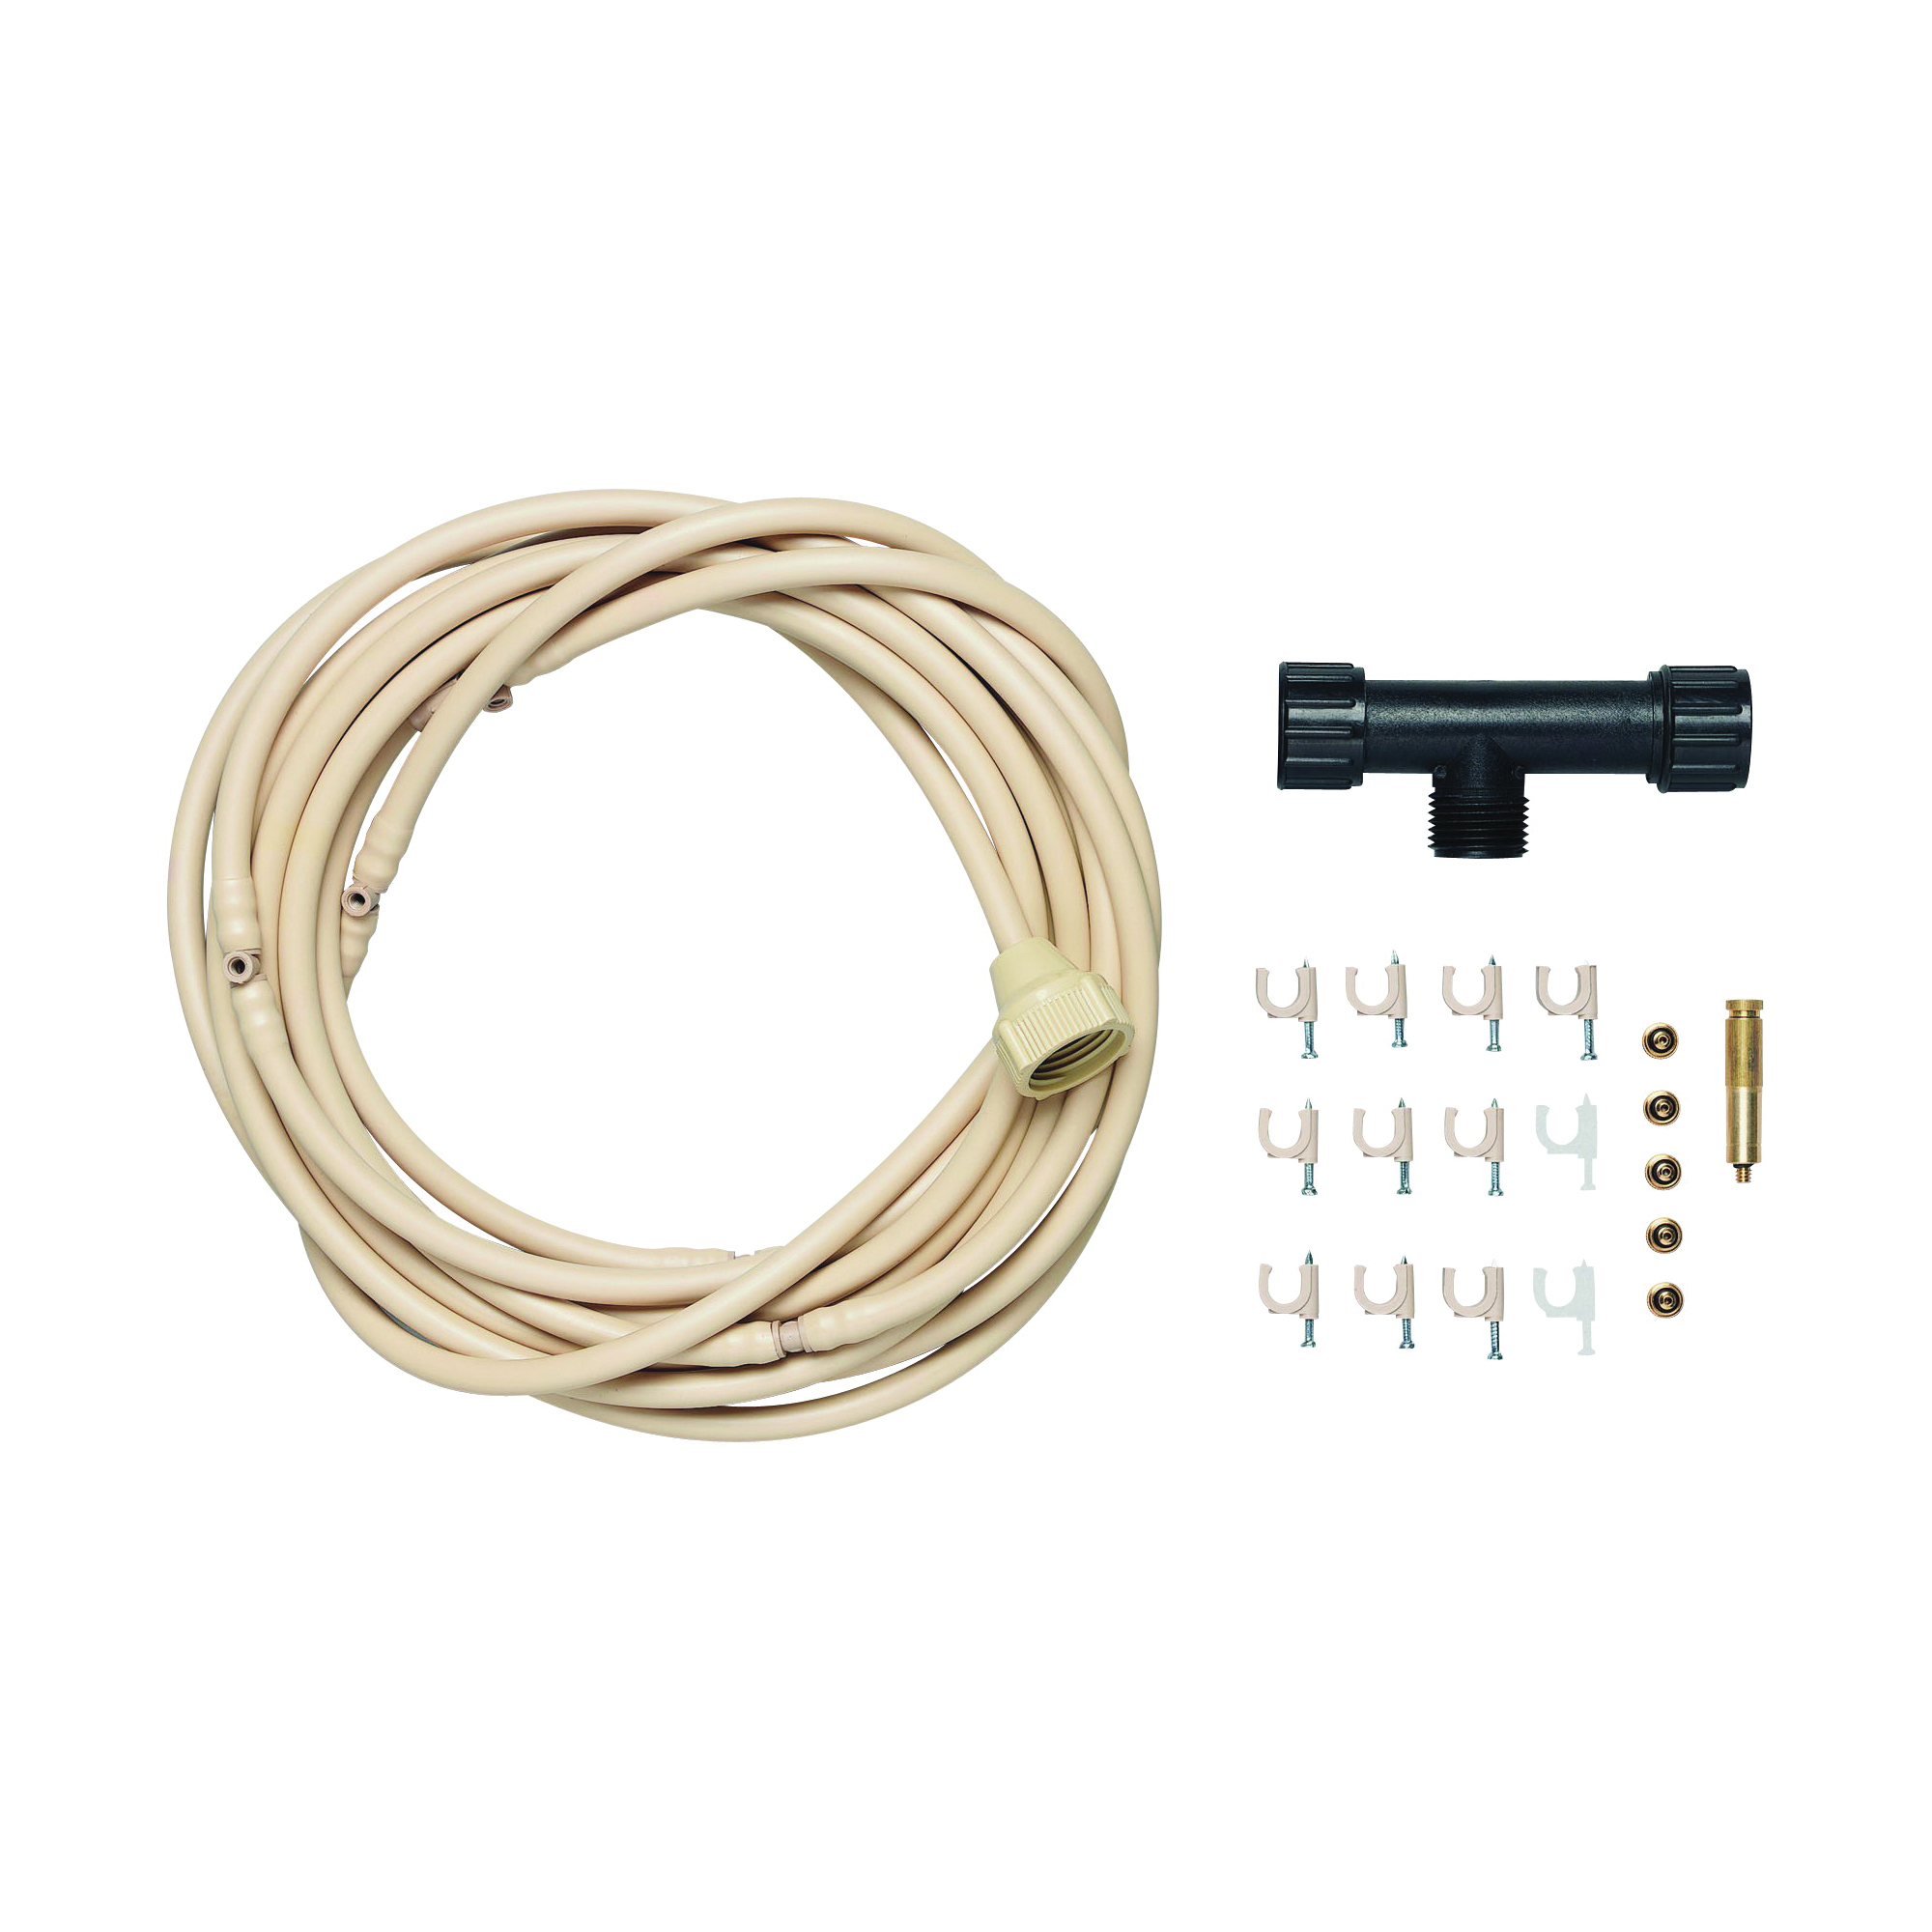 Orbit 20030 Mist Cooling Kit, 3/8 in Connection, Brass/Stainless Steel - 1